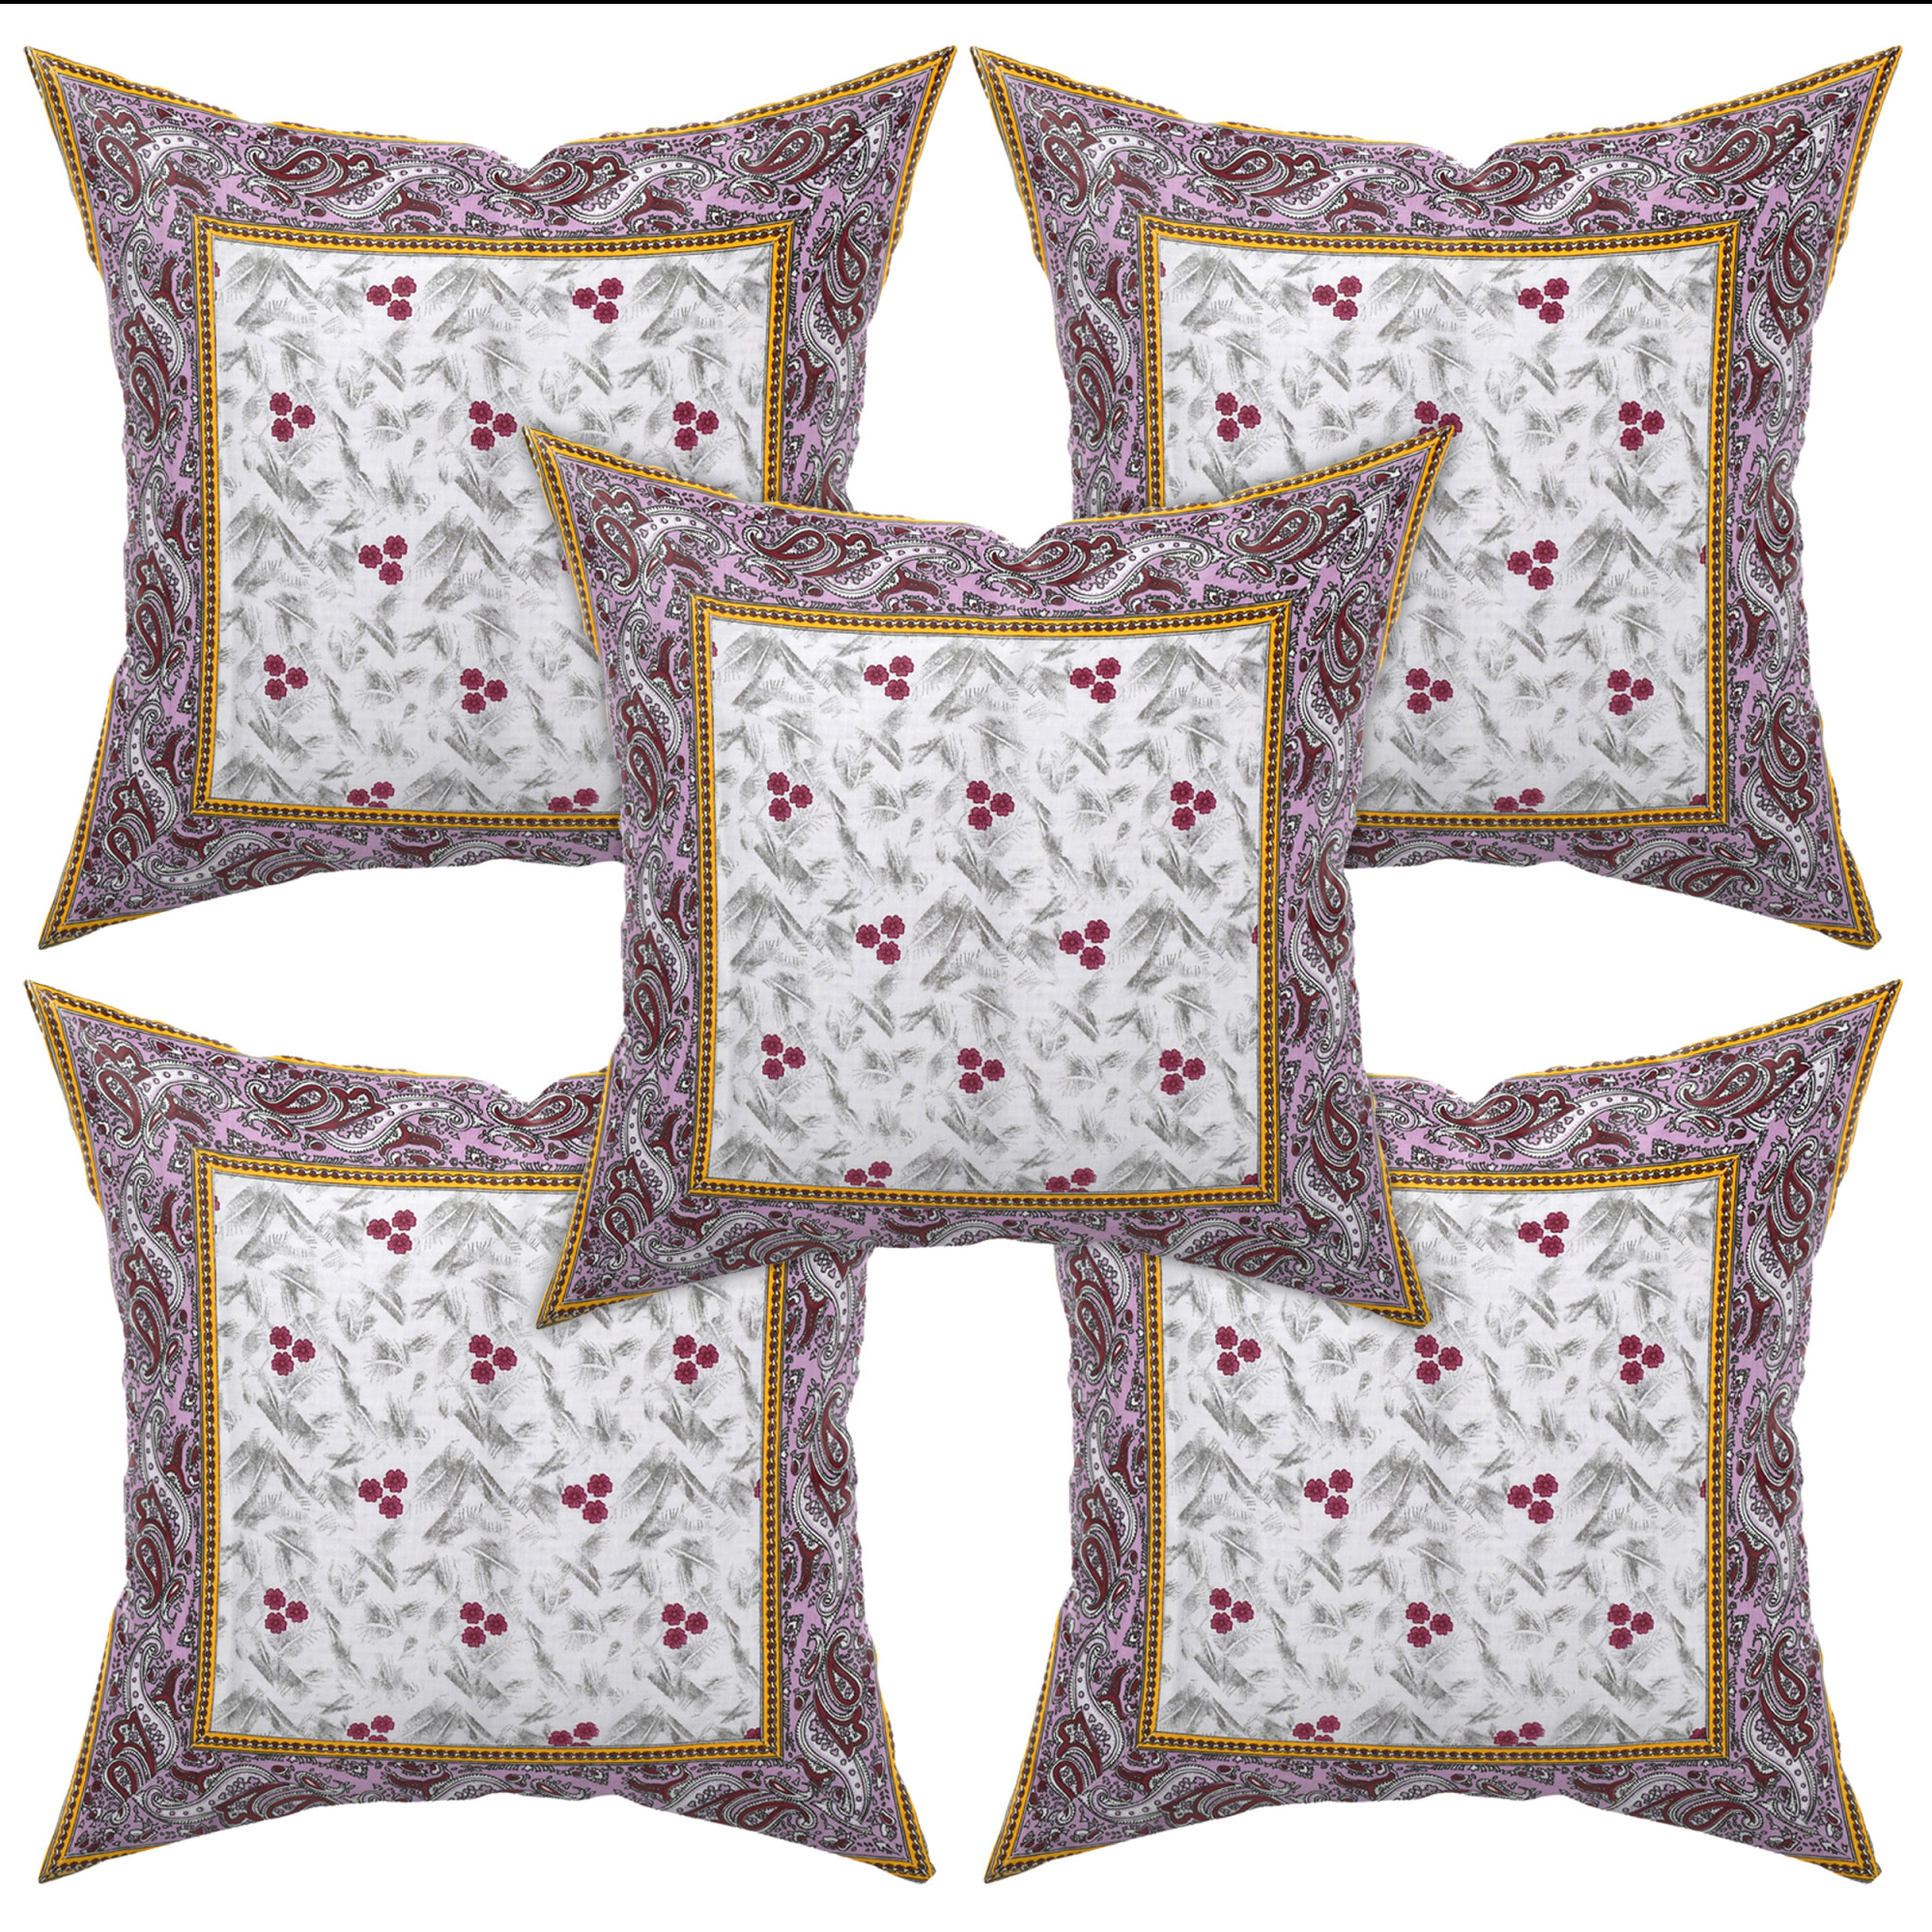 Kuber Industries Flower Design Cotton Abstract Decorative Throw Pillow/Cushion Covers 16